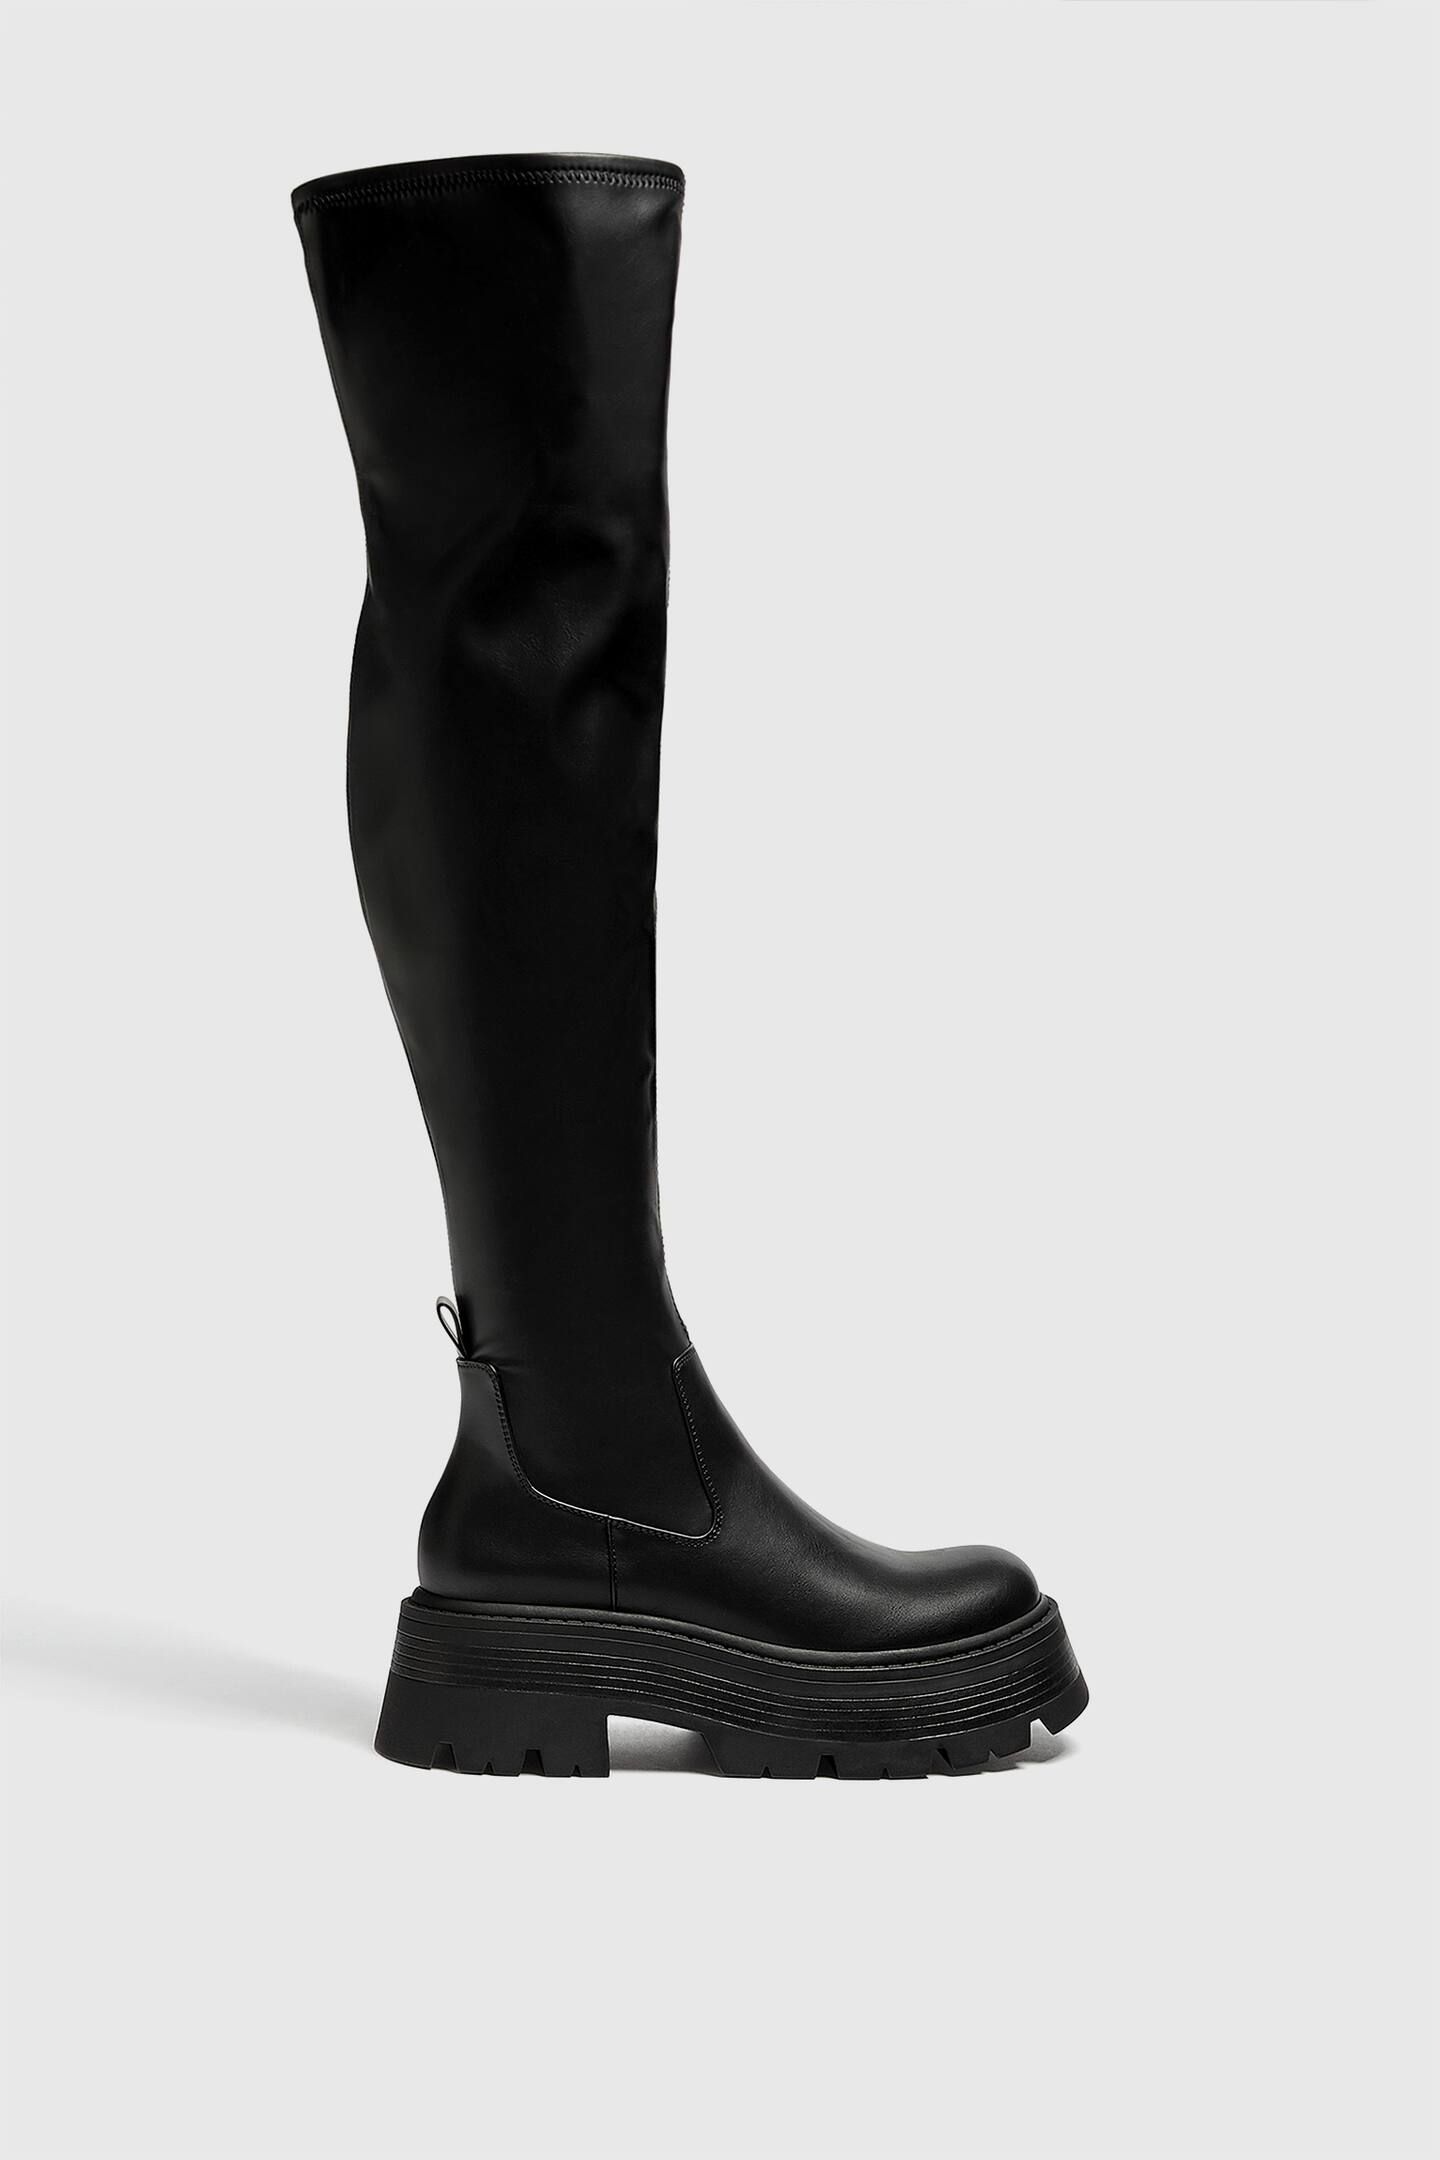 Stretch XL knee-high boots | PULL and BEAR UK